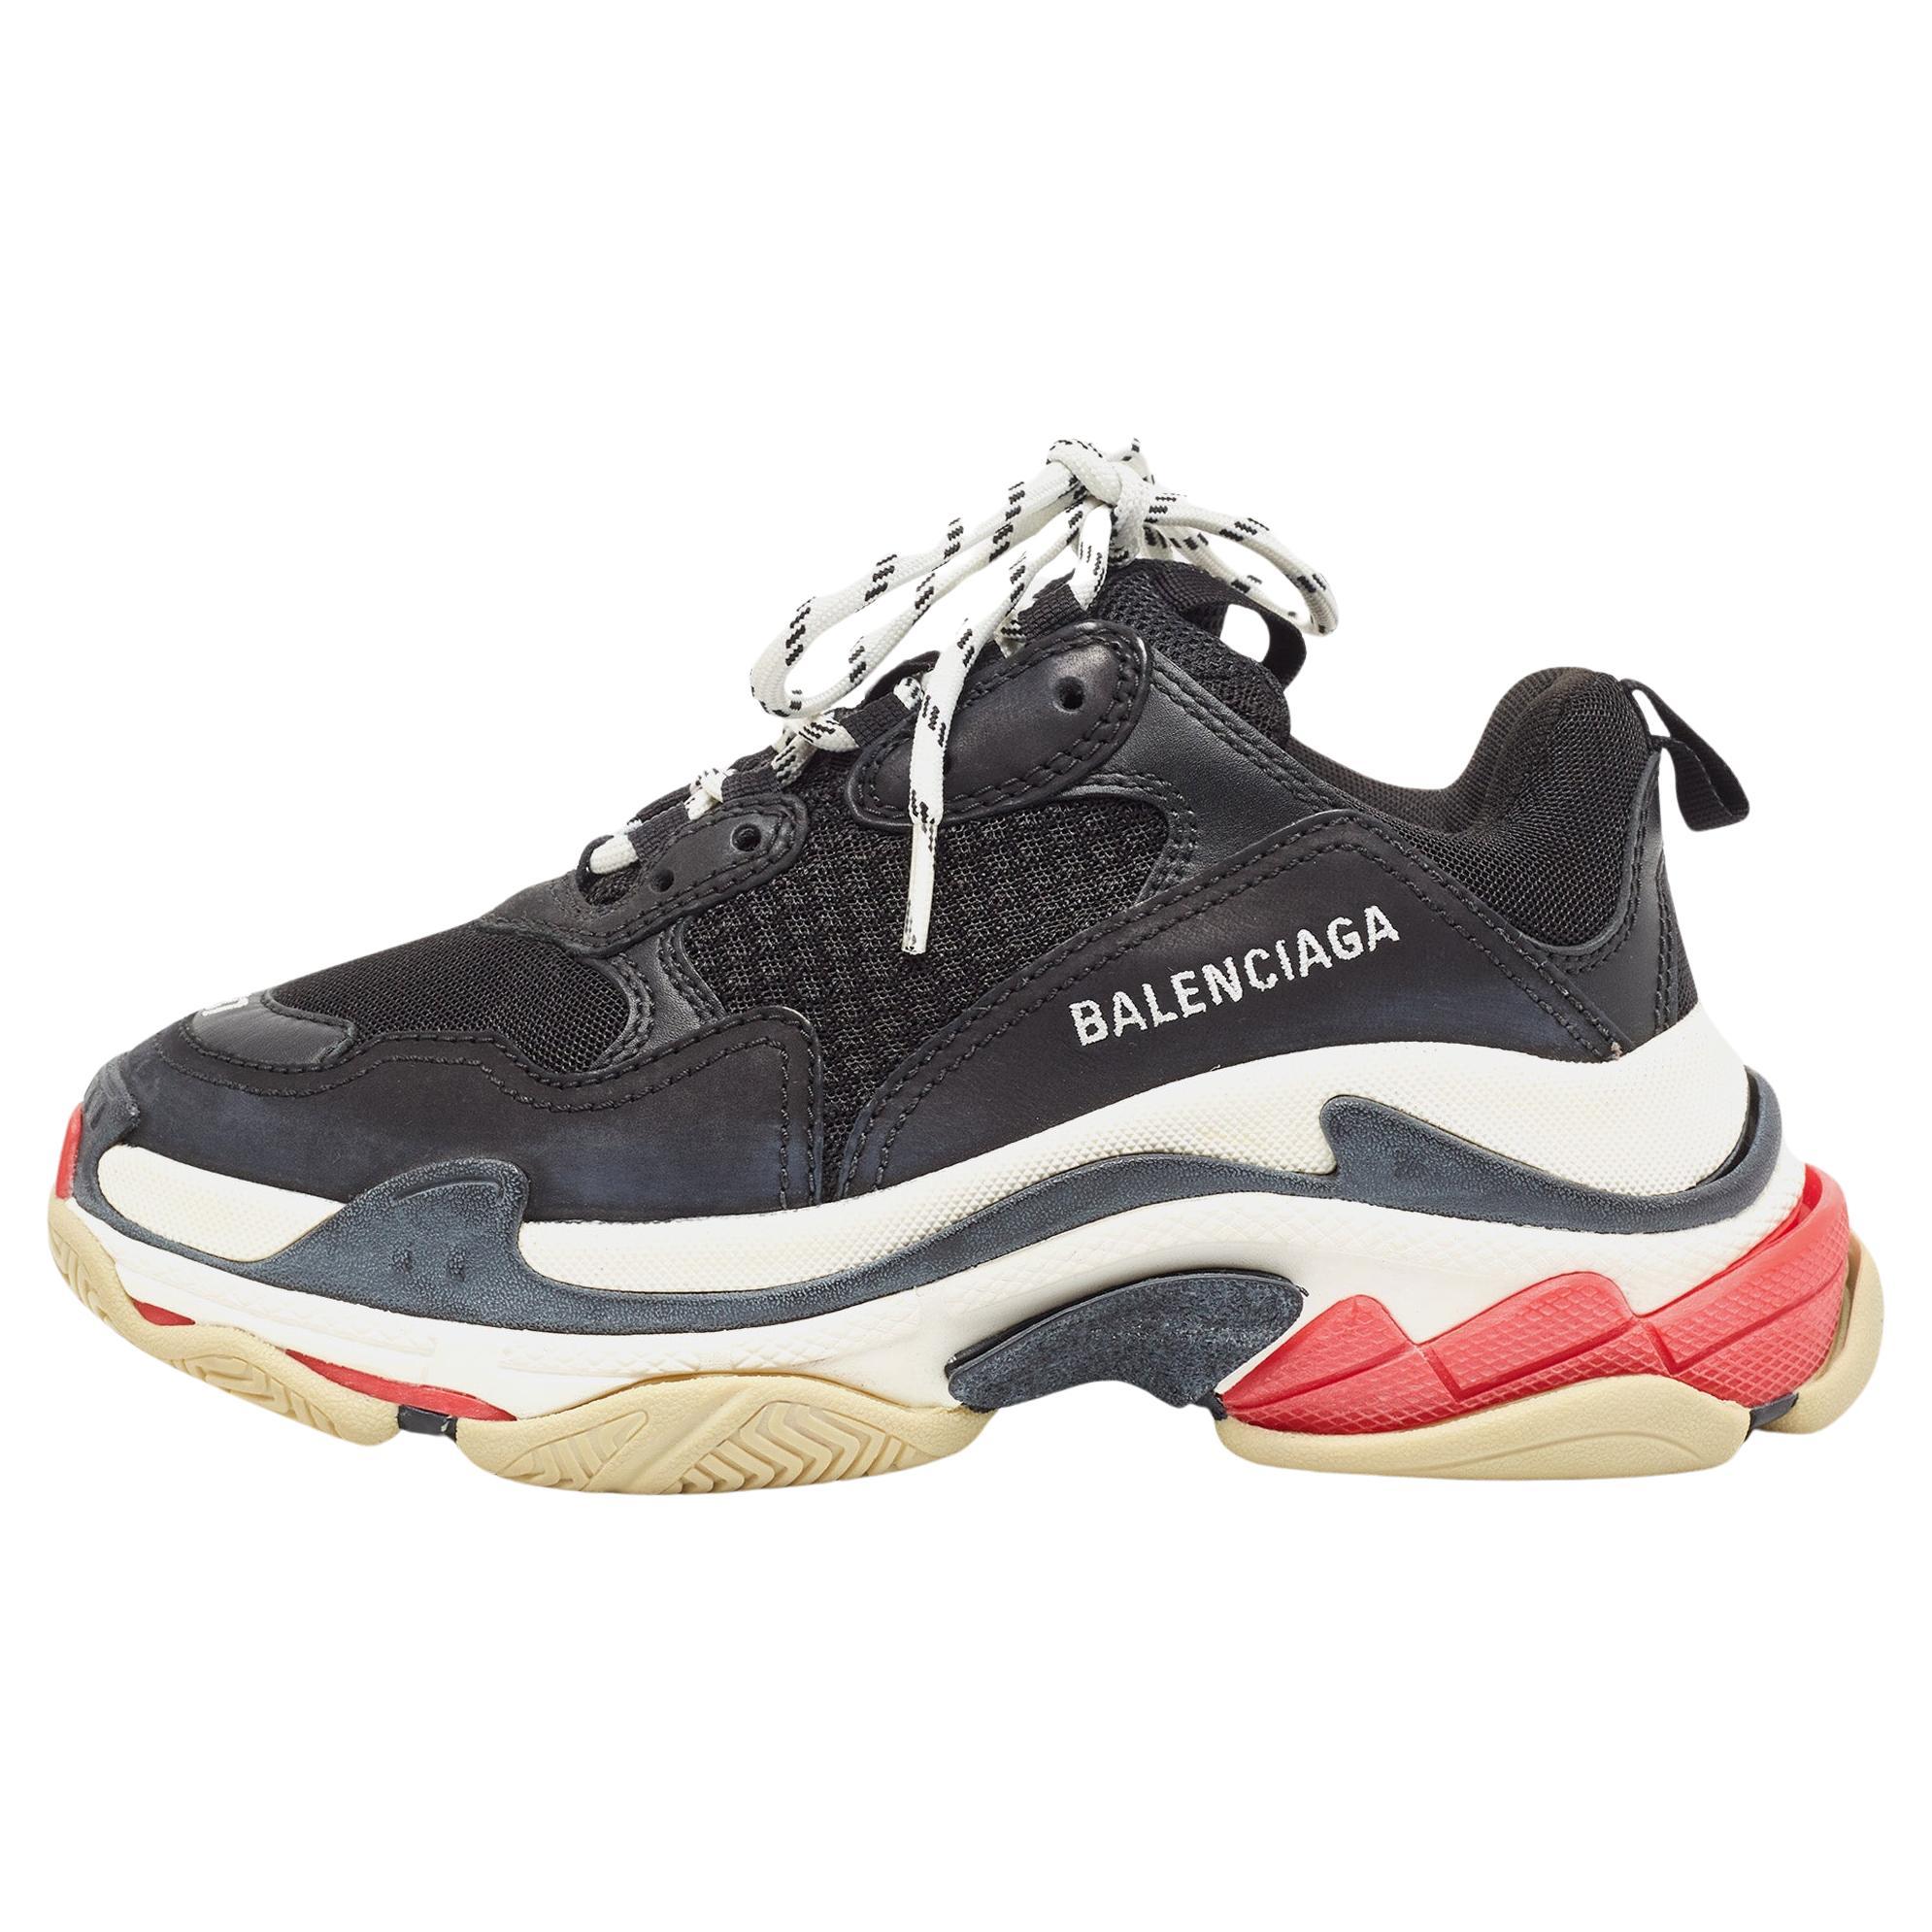 Balenciaga Black Mesh and Leather Triple S Sneakers Size 37 For Sale